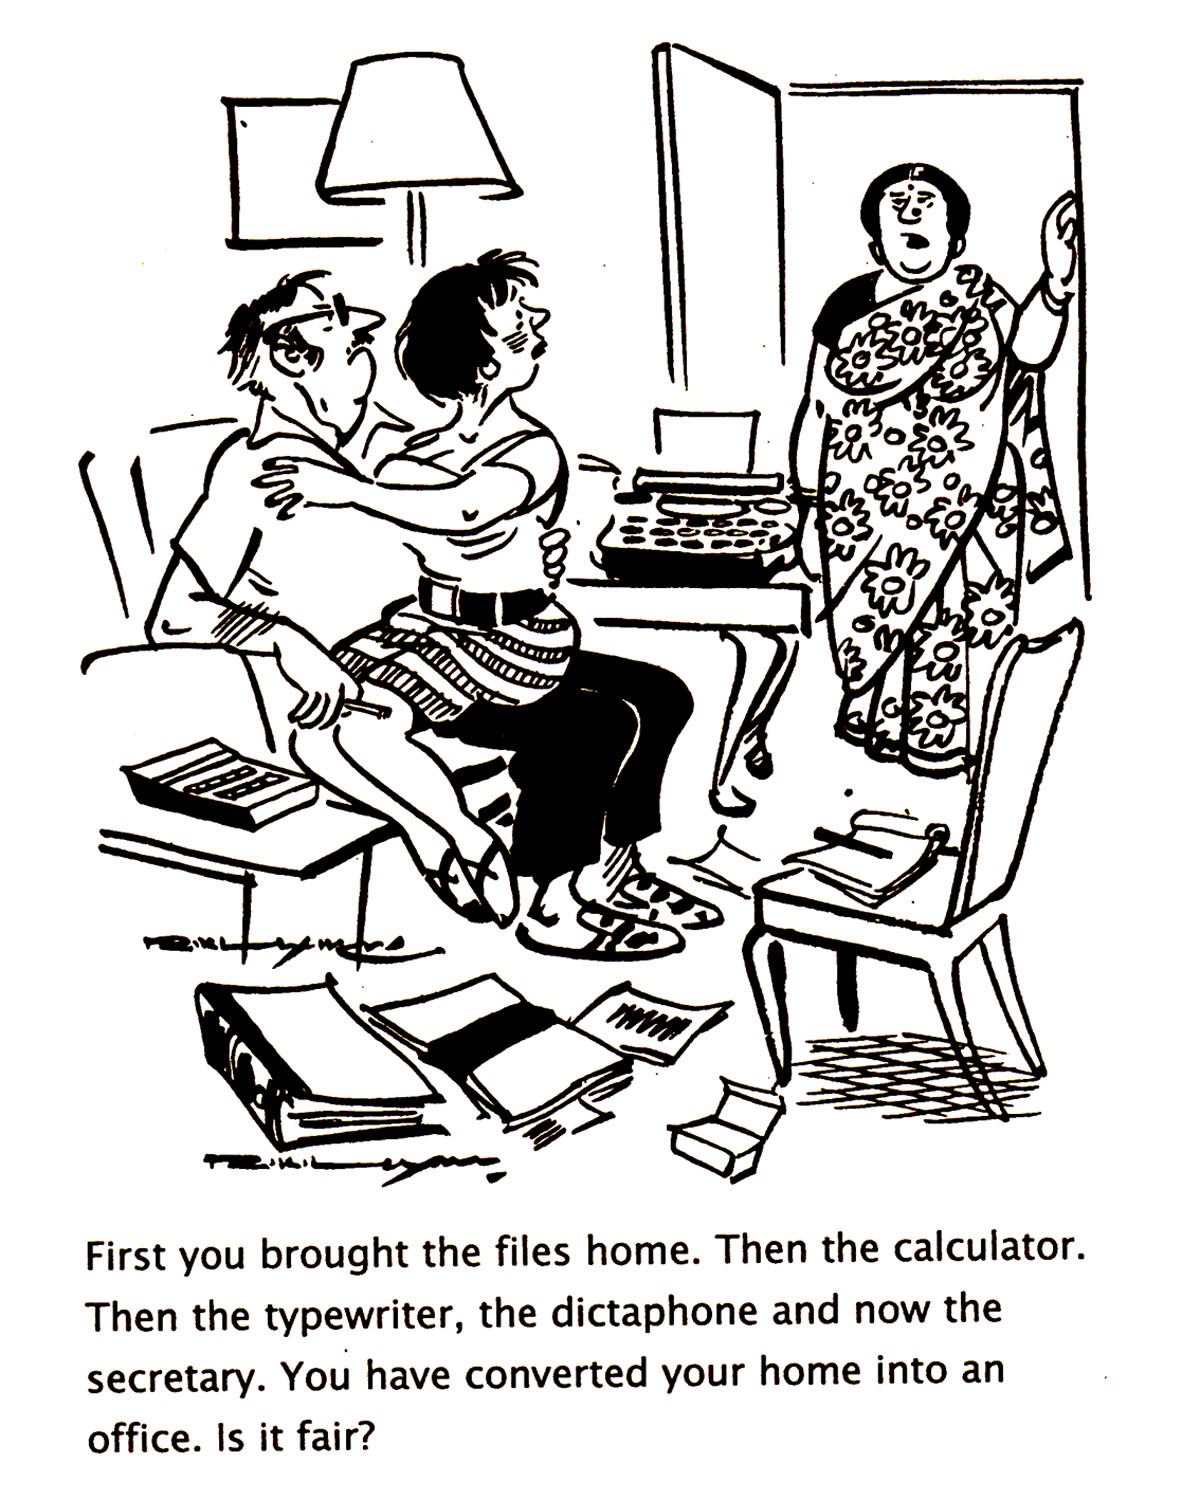 Work From Home funny cartoons the world's largest on-line collection of cartoons, funny images and comics